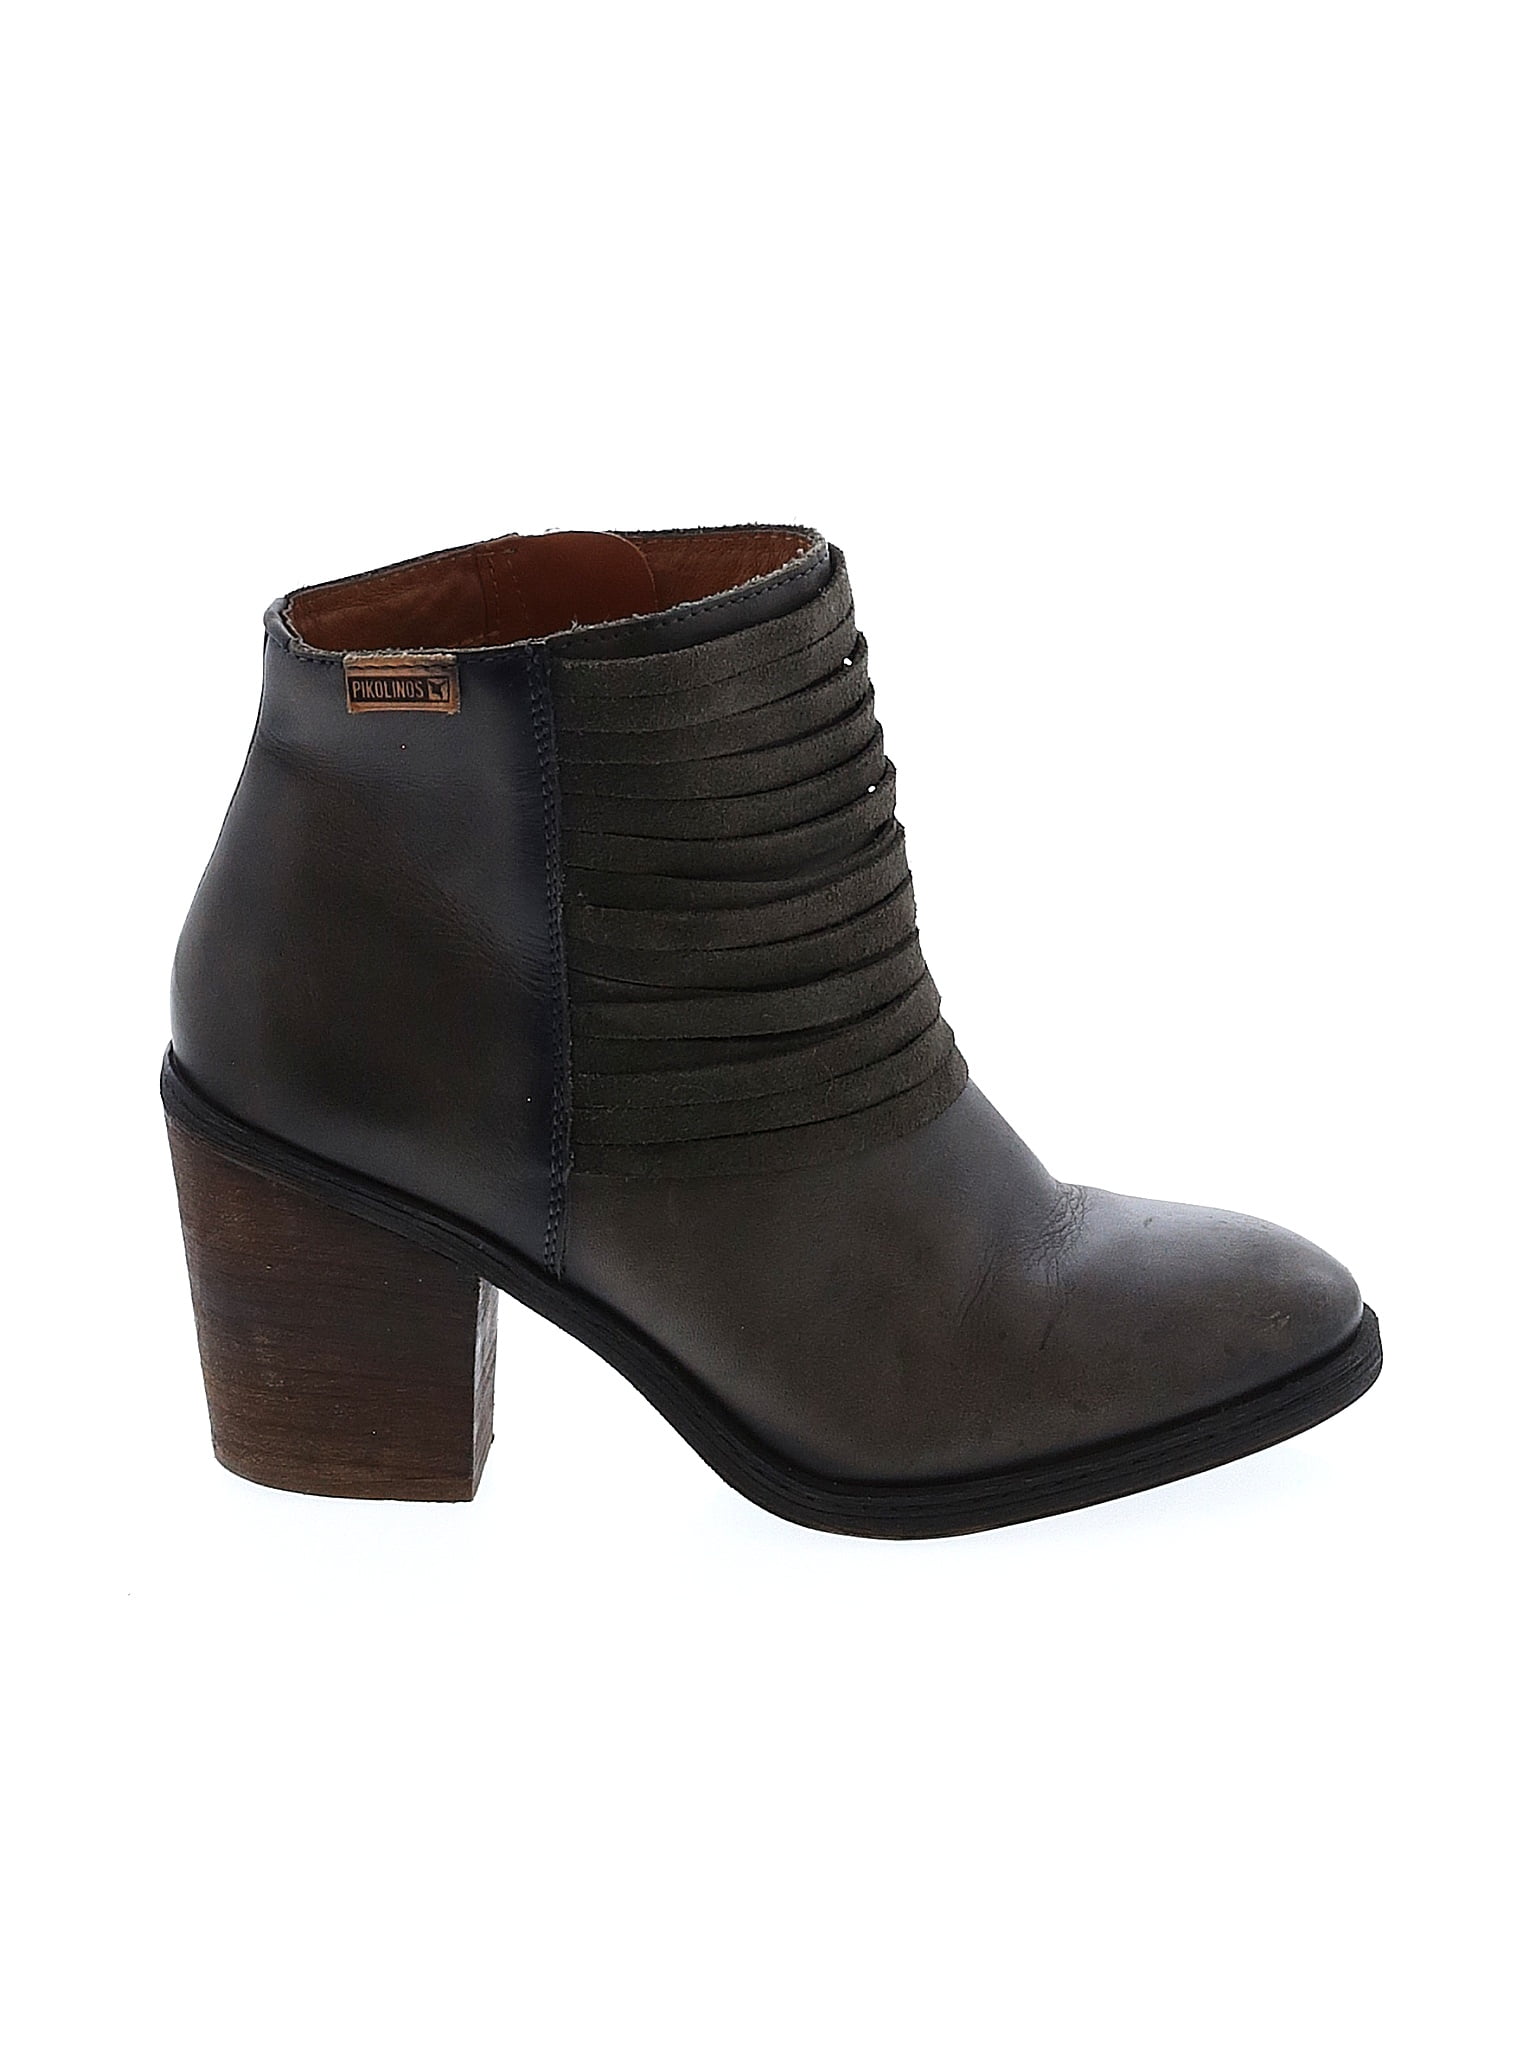 Pikolinos Solid Gray Ankle Boots Size 38 (EU) - 67% off | thredUP